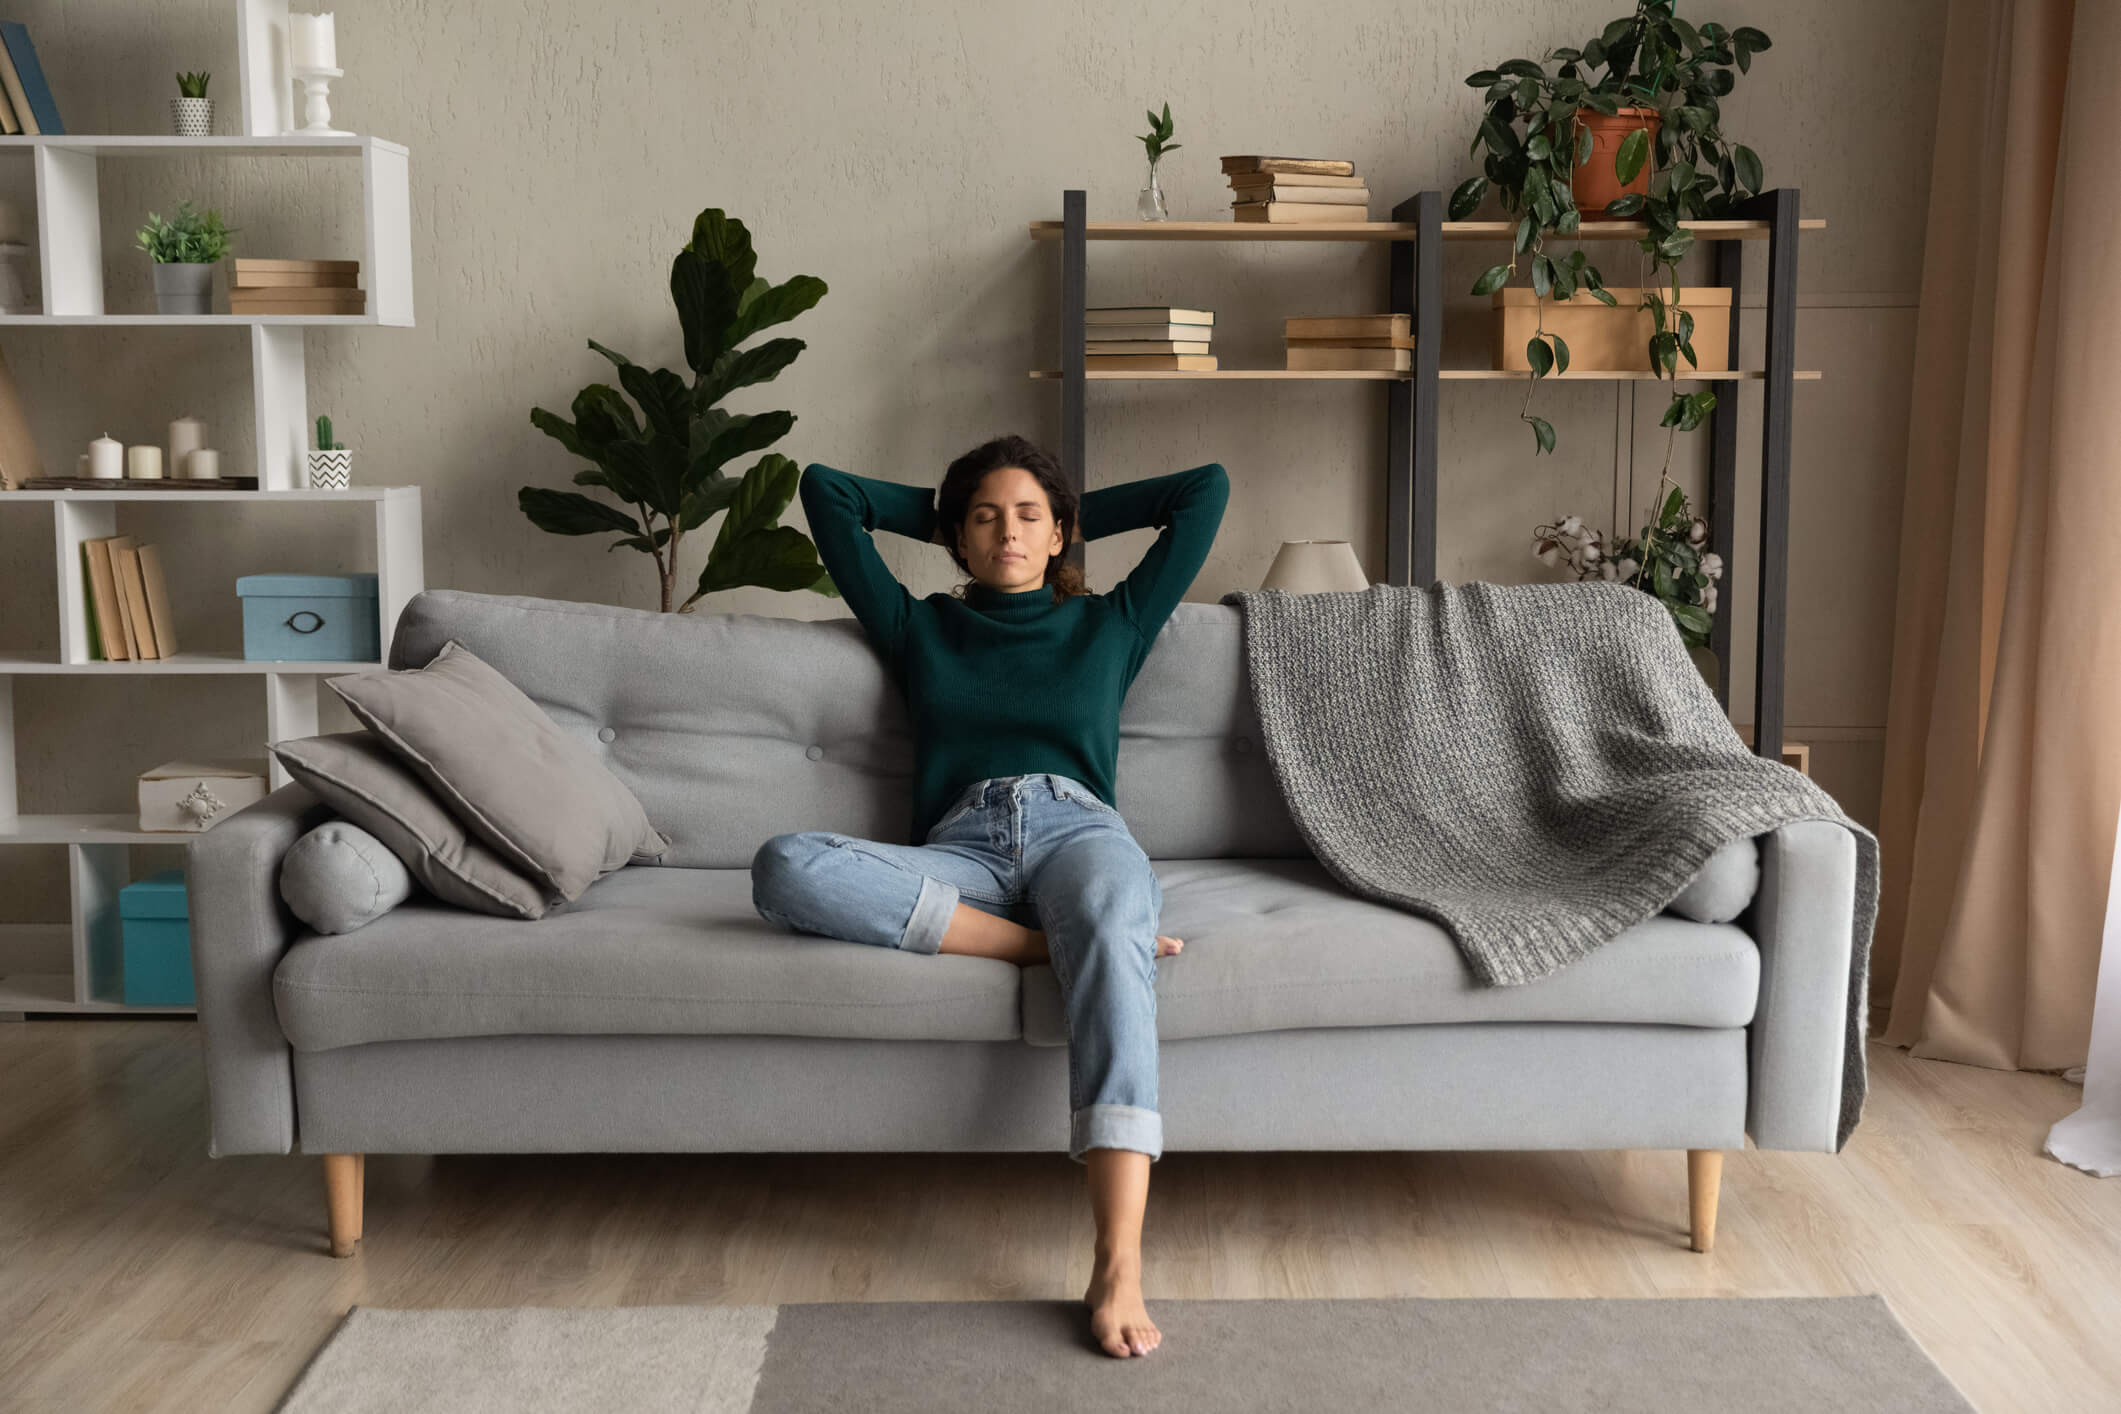 Young woman wearing a green sweater and jeans laying on a couch relaxed.